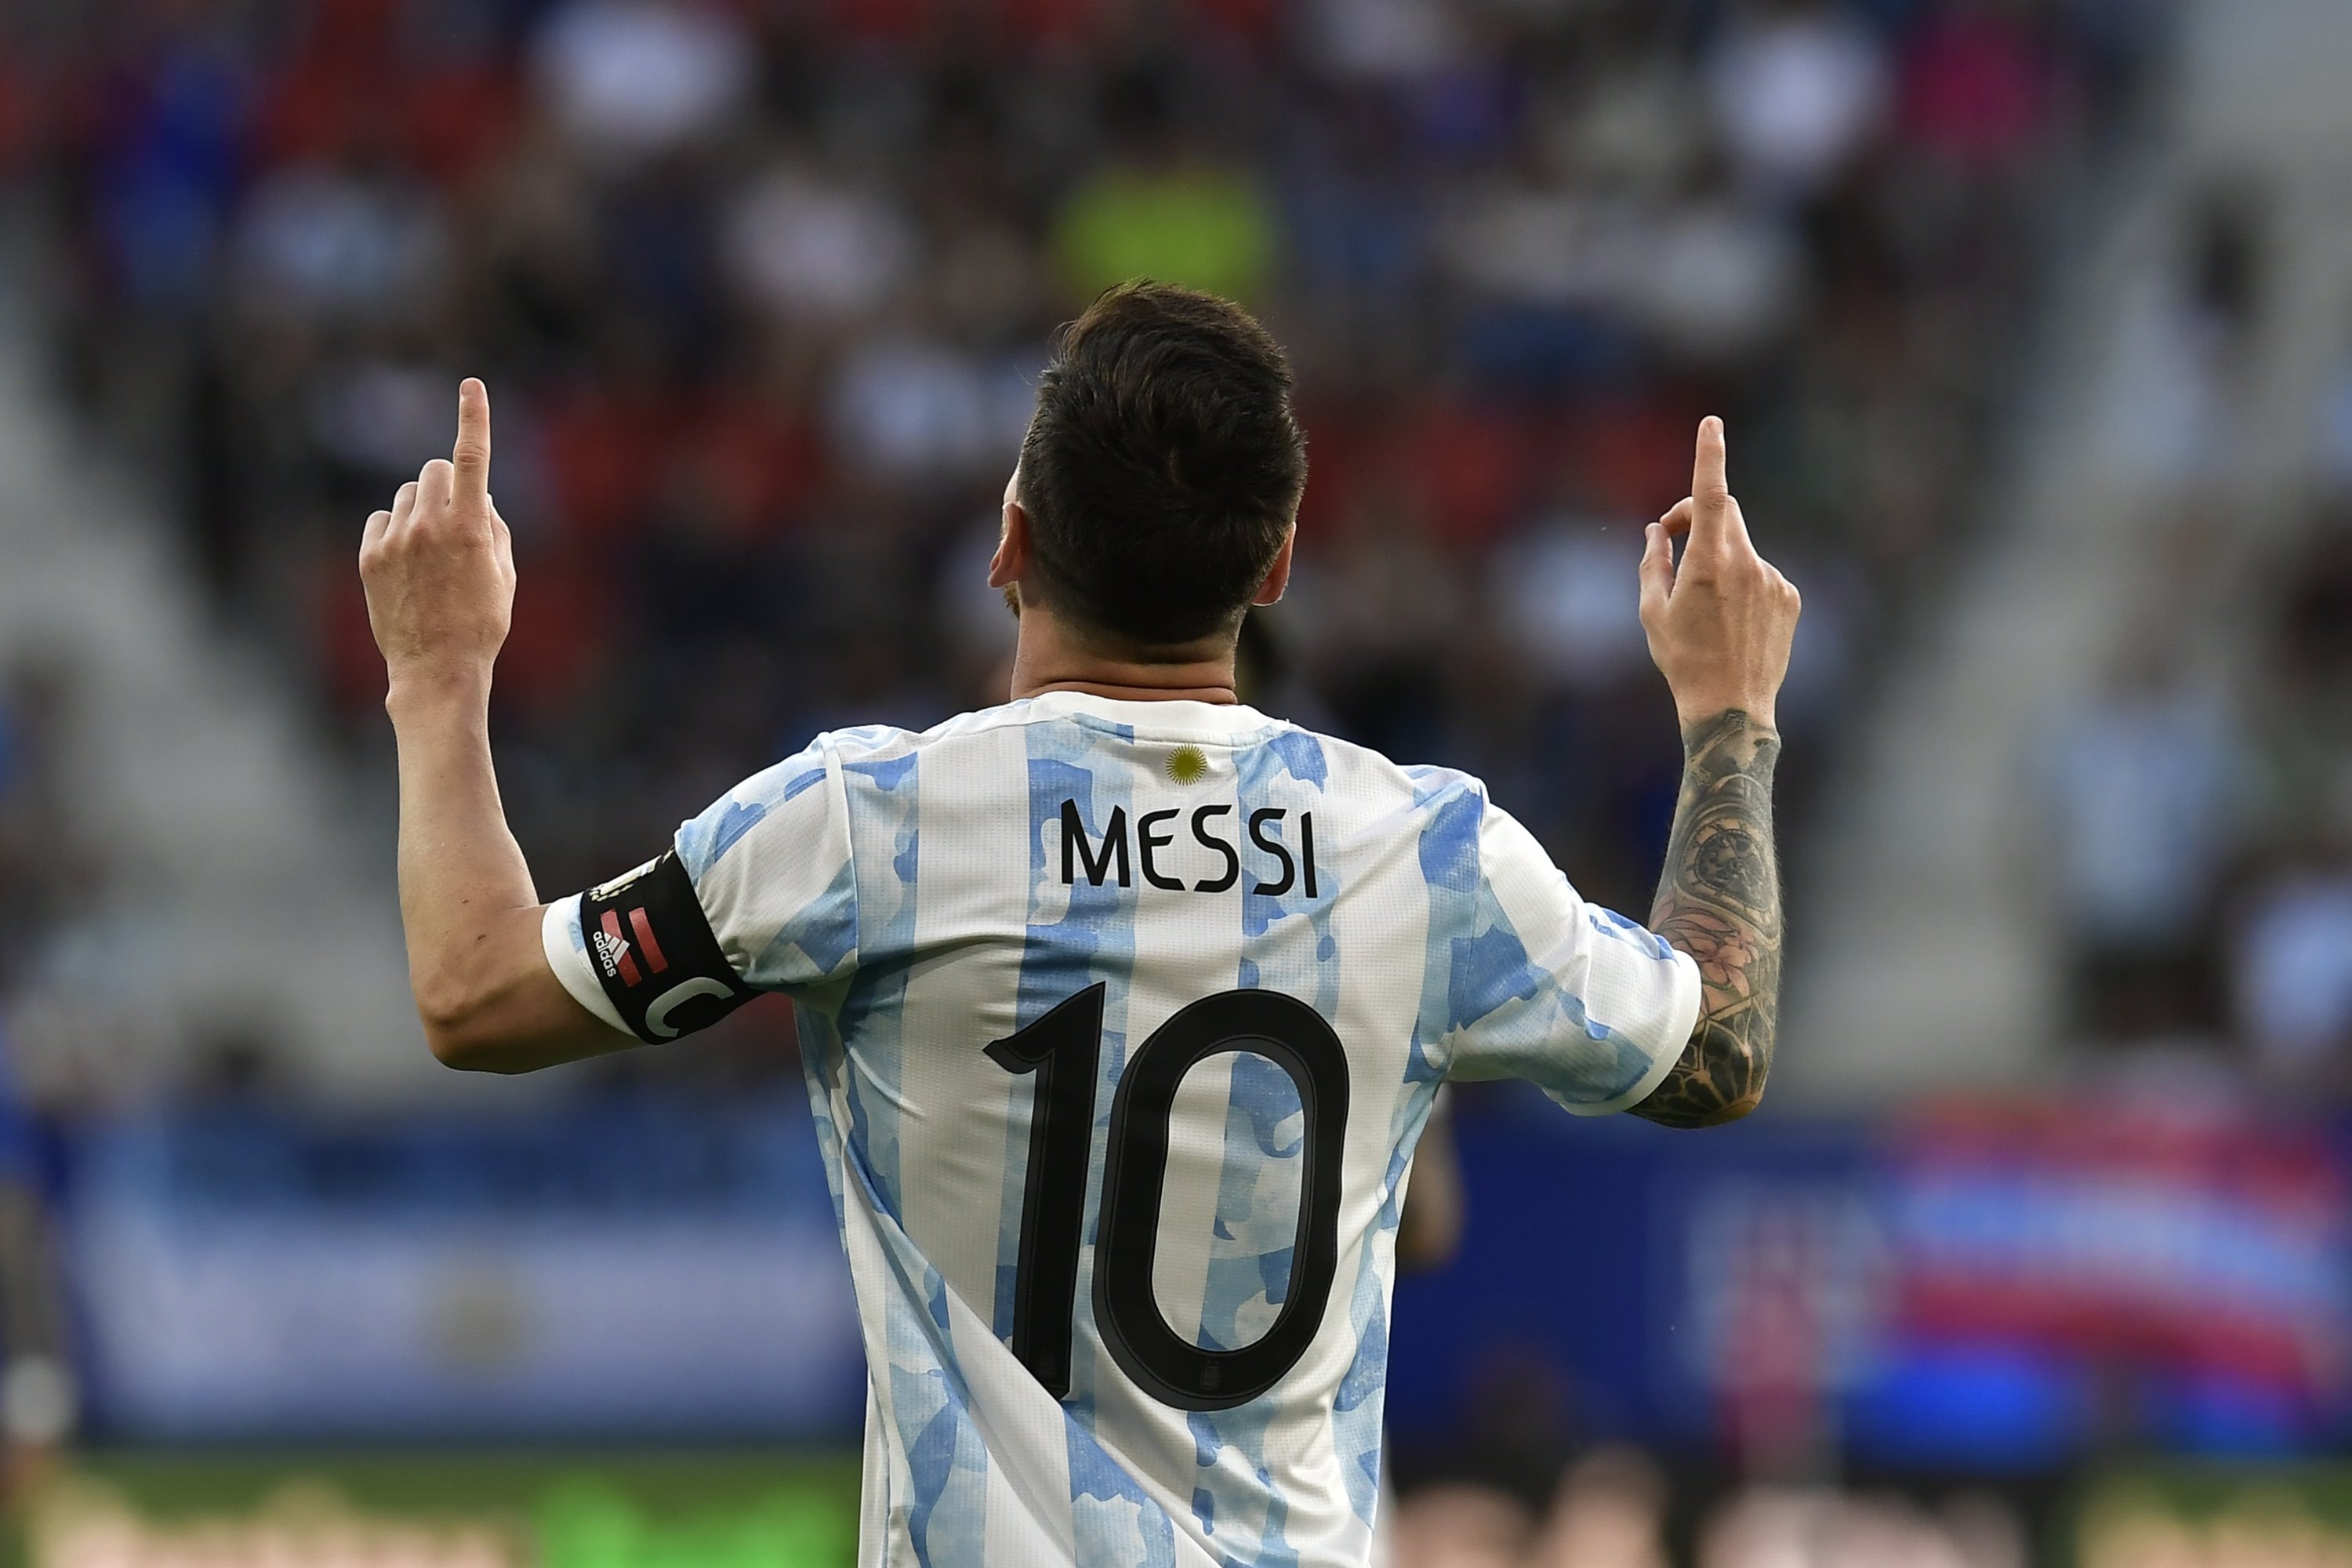 Lionel Messi overtakes Puskas after netting 5 for Argentina | Daily Sabah